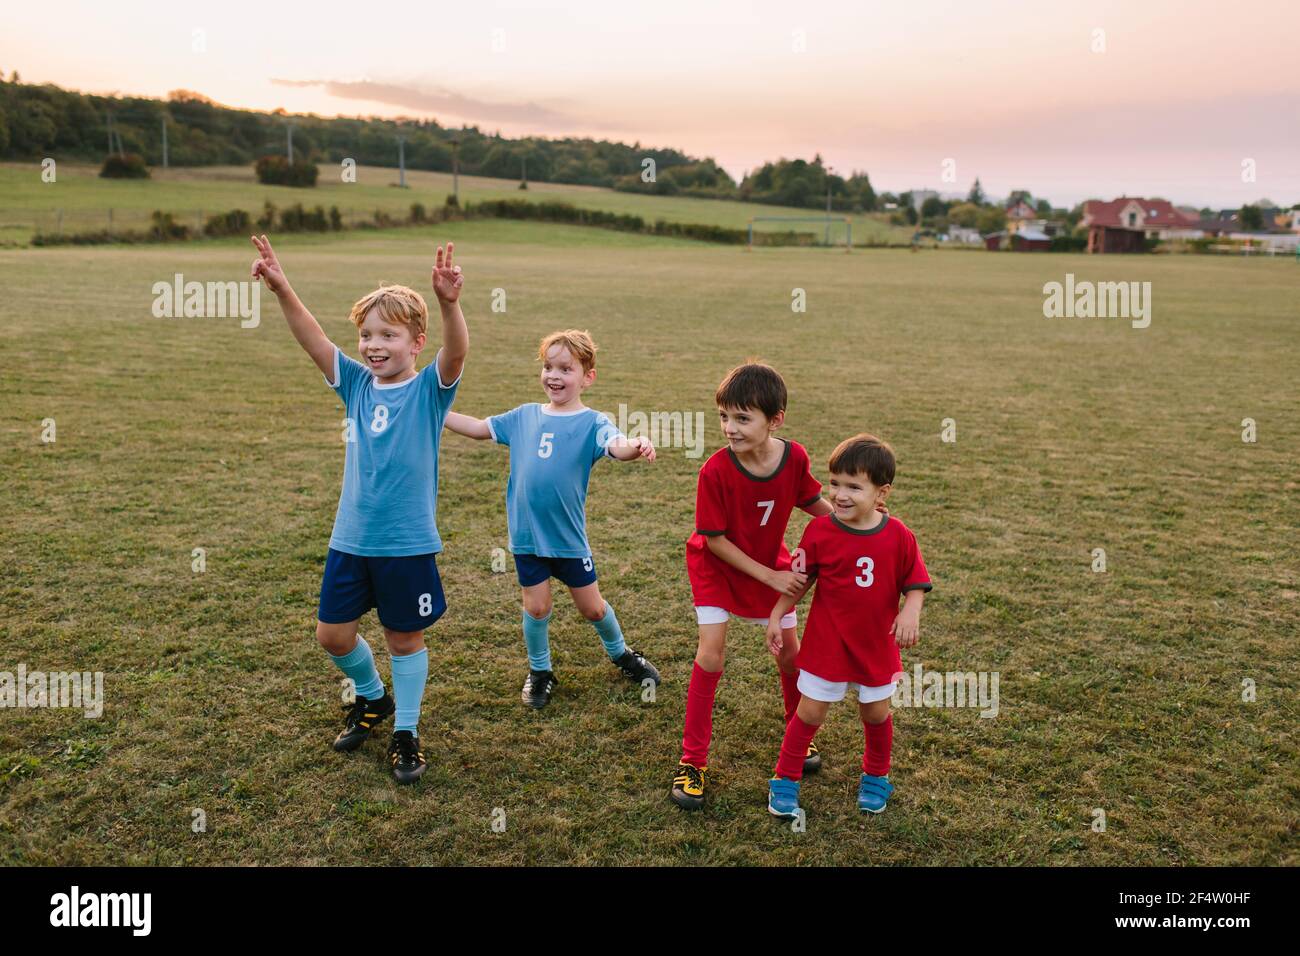 Children playing amateur football. Cheerful boys in soccer dresses having fun at training on pitch. Stock Photo